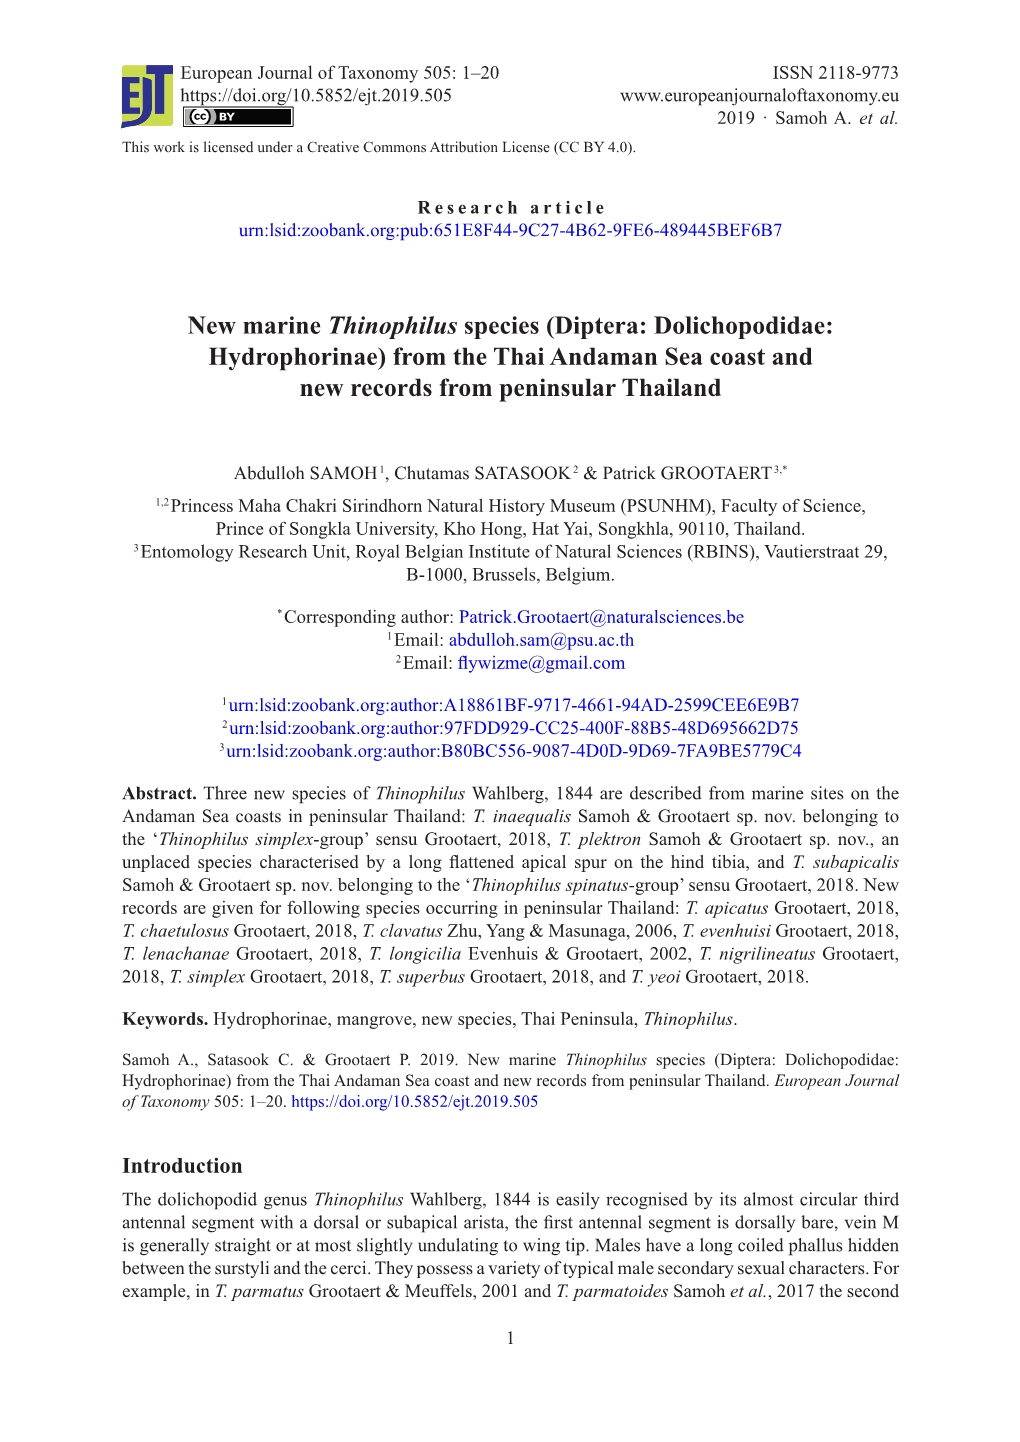 New Marine Thinophilus Species (Diptera: Dolichopodidae: Hydrophorinae) from the Thai Andaman Sea Coast and New Records from Peninsular Thailand